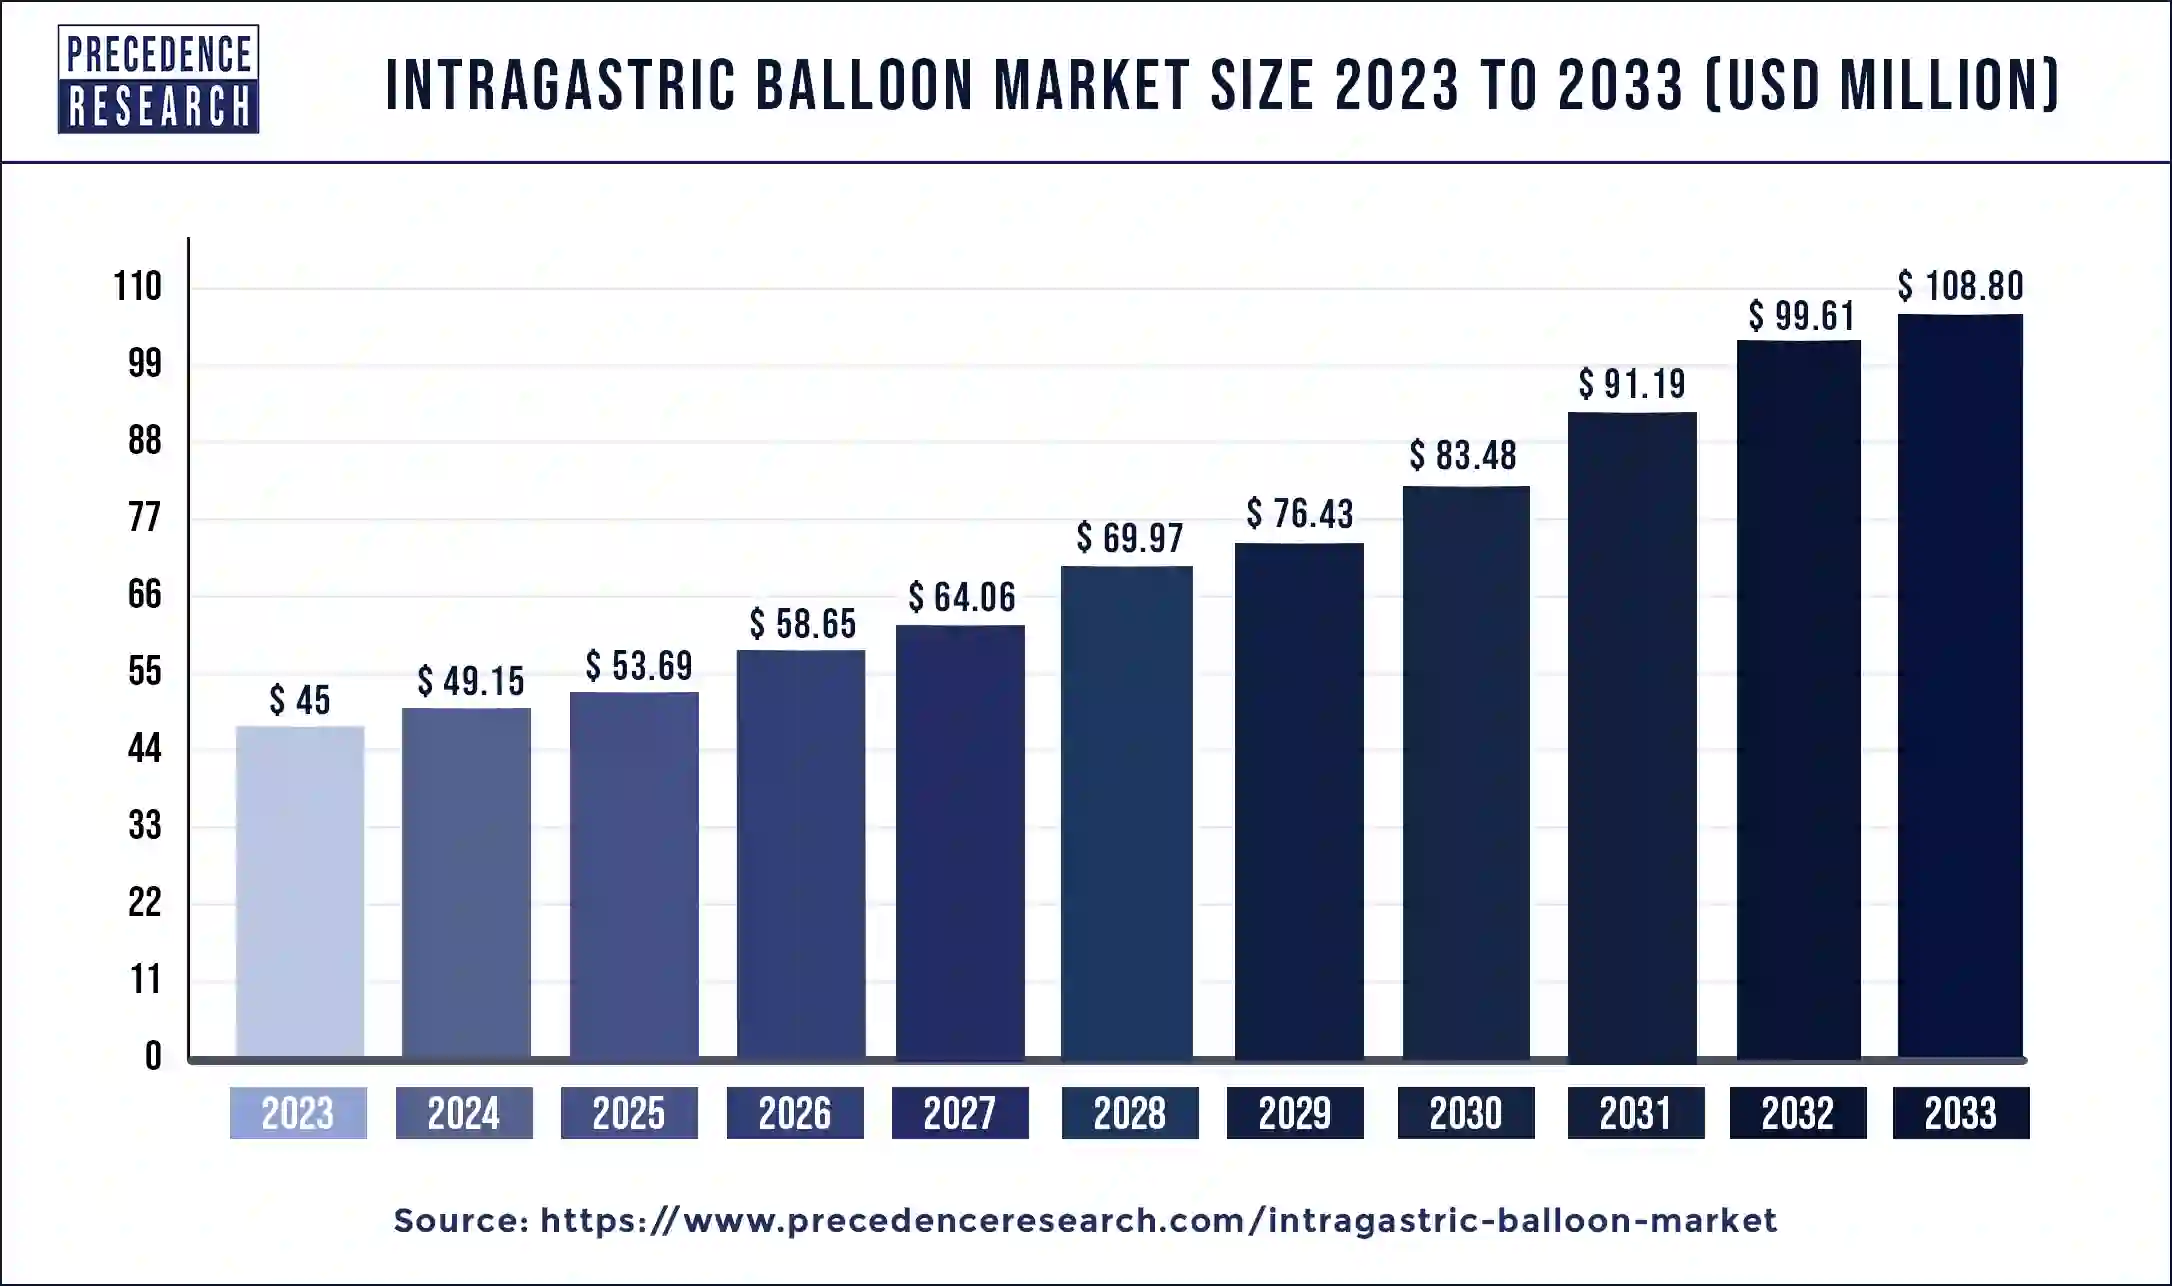 Intragastric Balloon Market Size 2024 to 2033